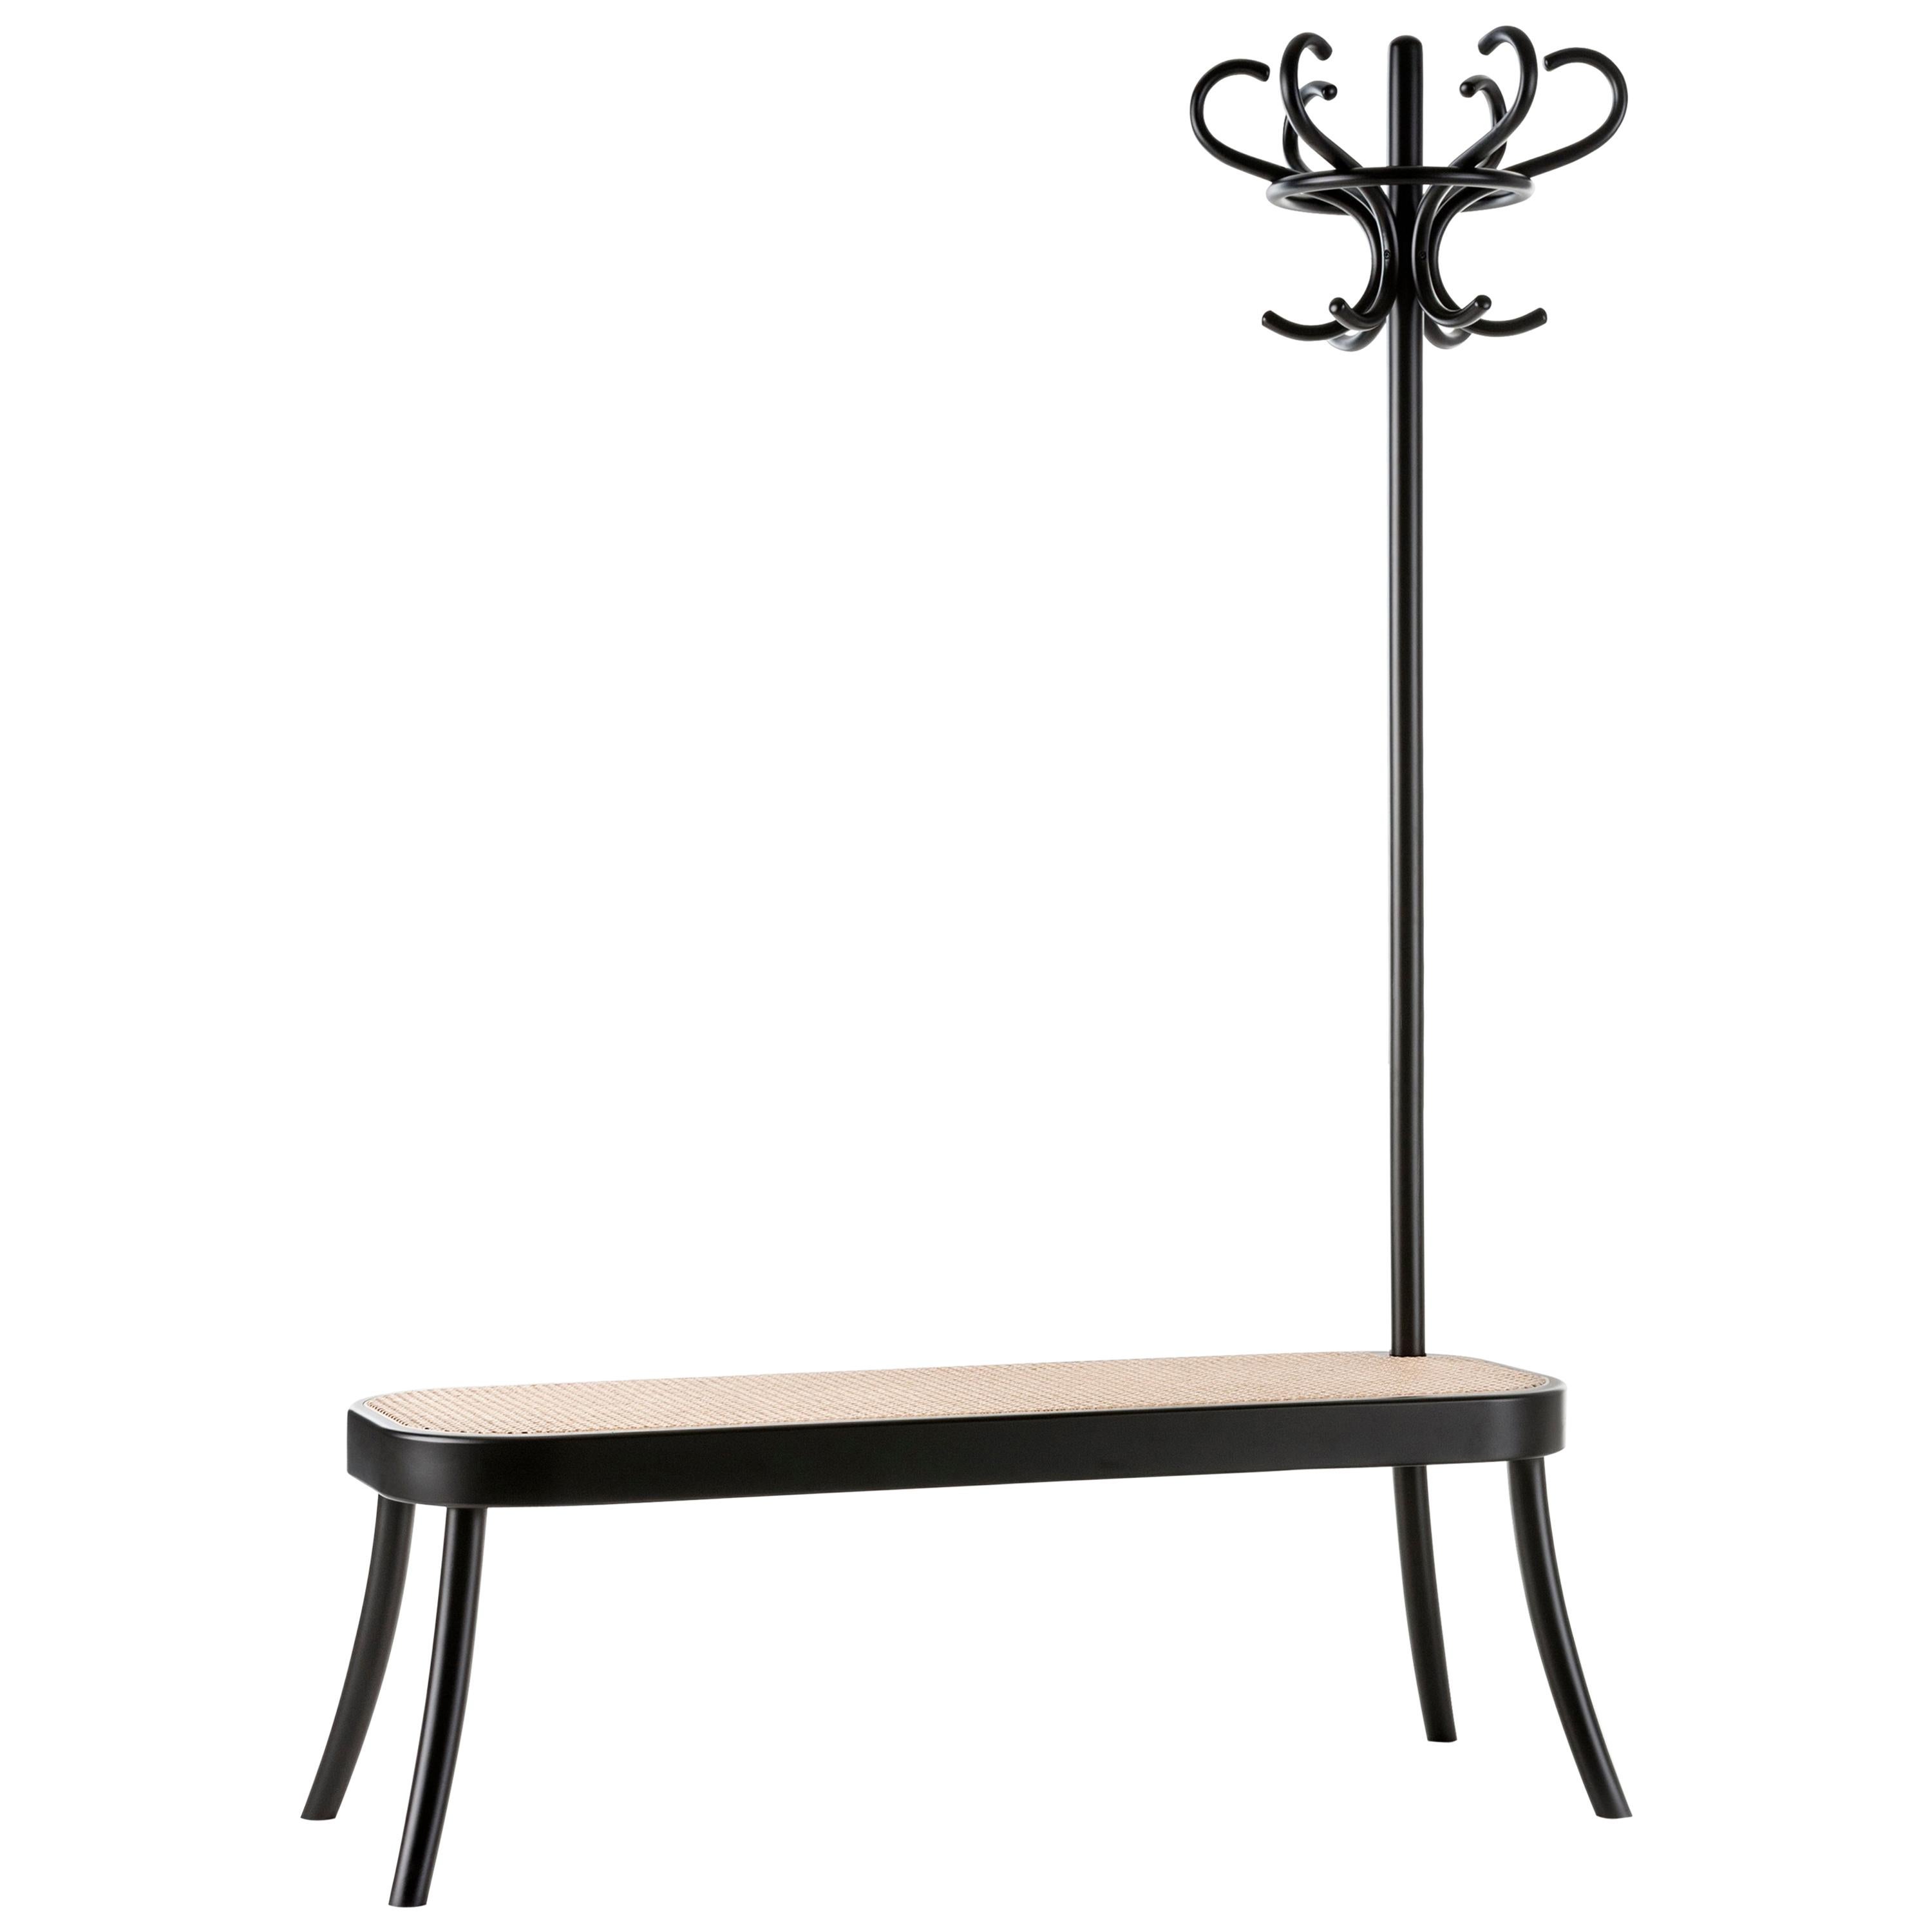 Gebrüder Thonet Vienna GmbH Coat Rack Bench in Black with Cane Seat For Sale